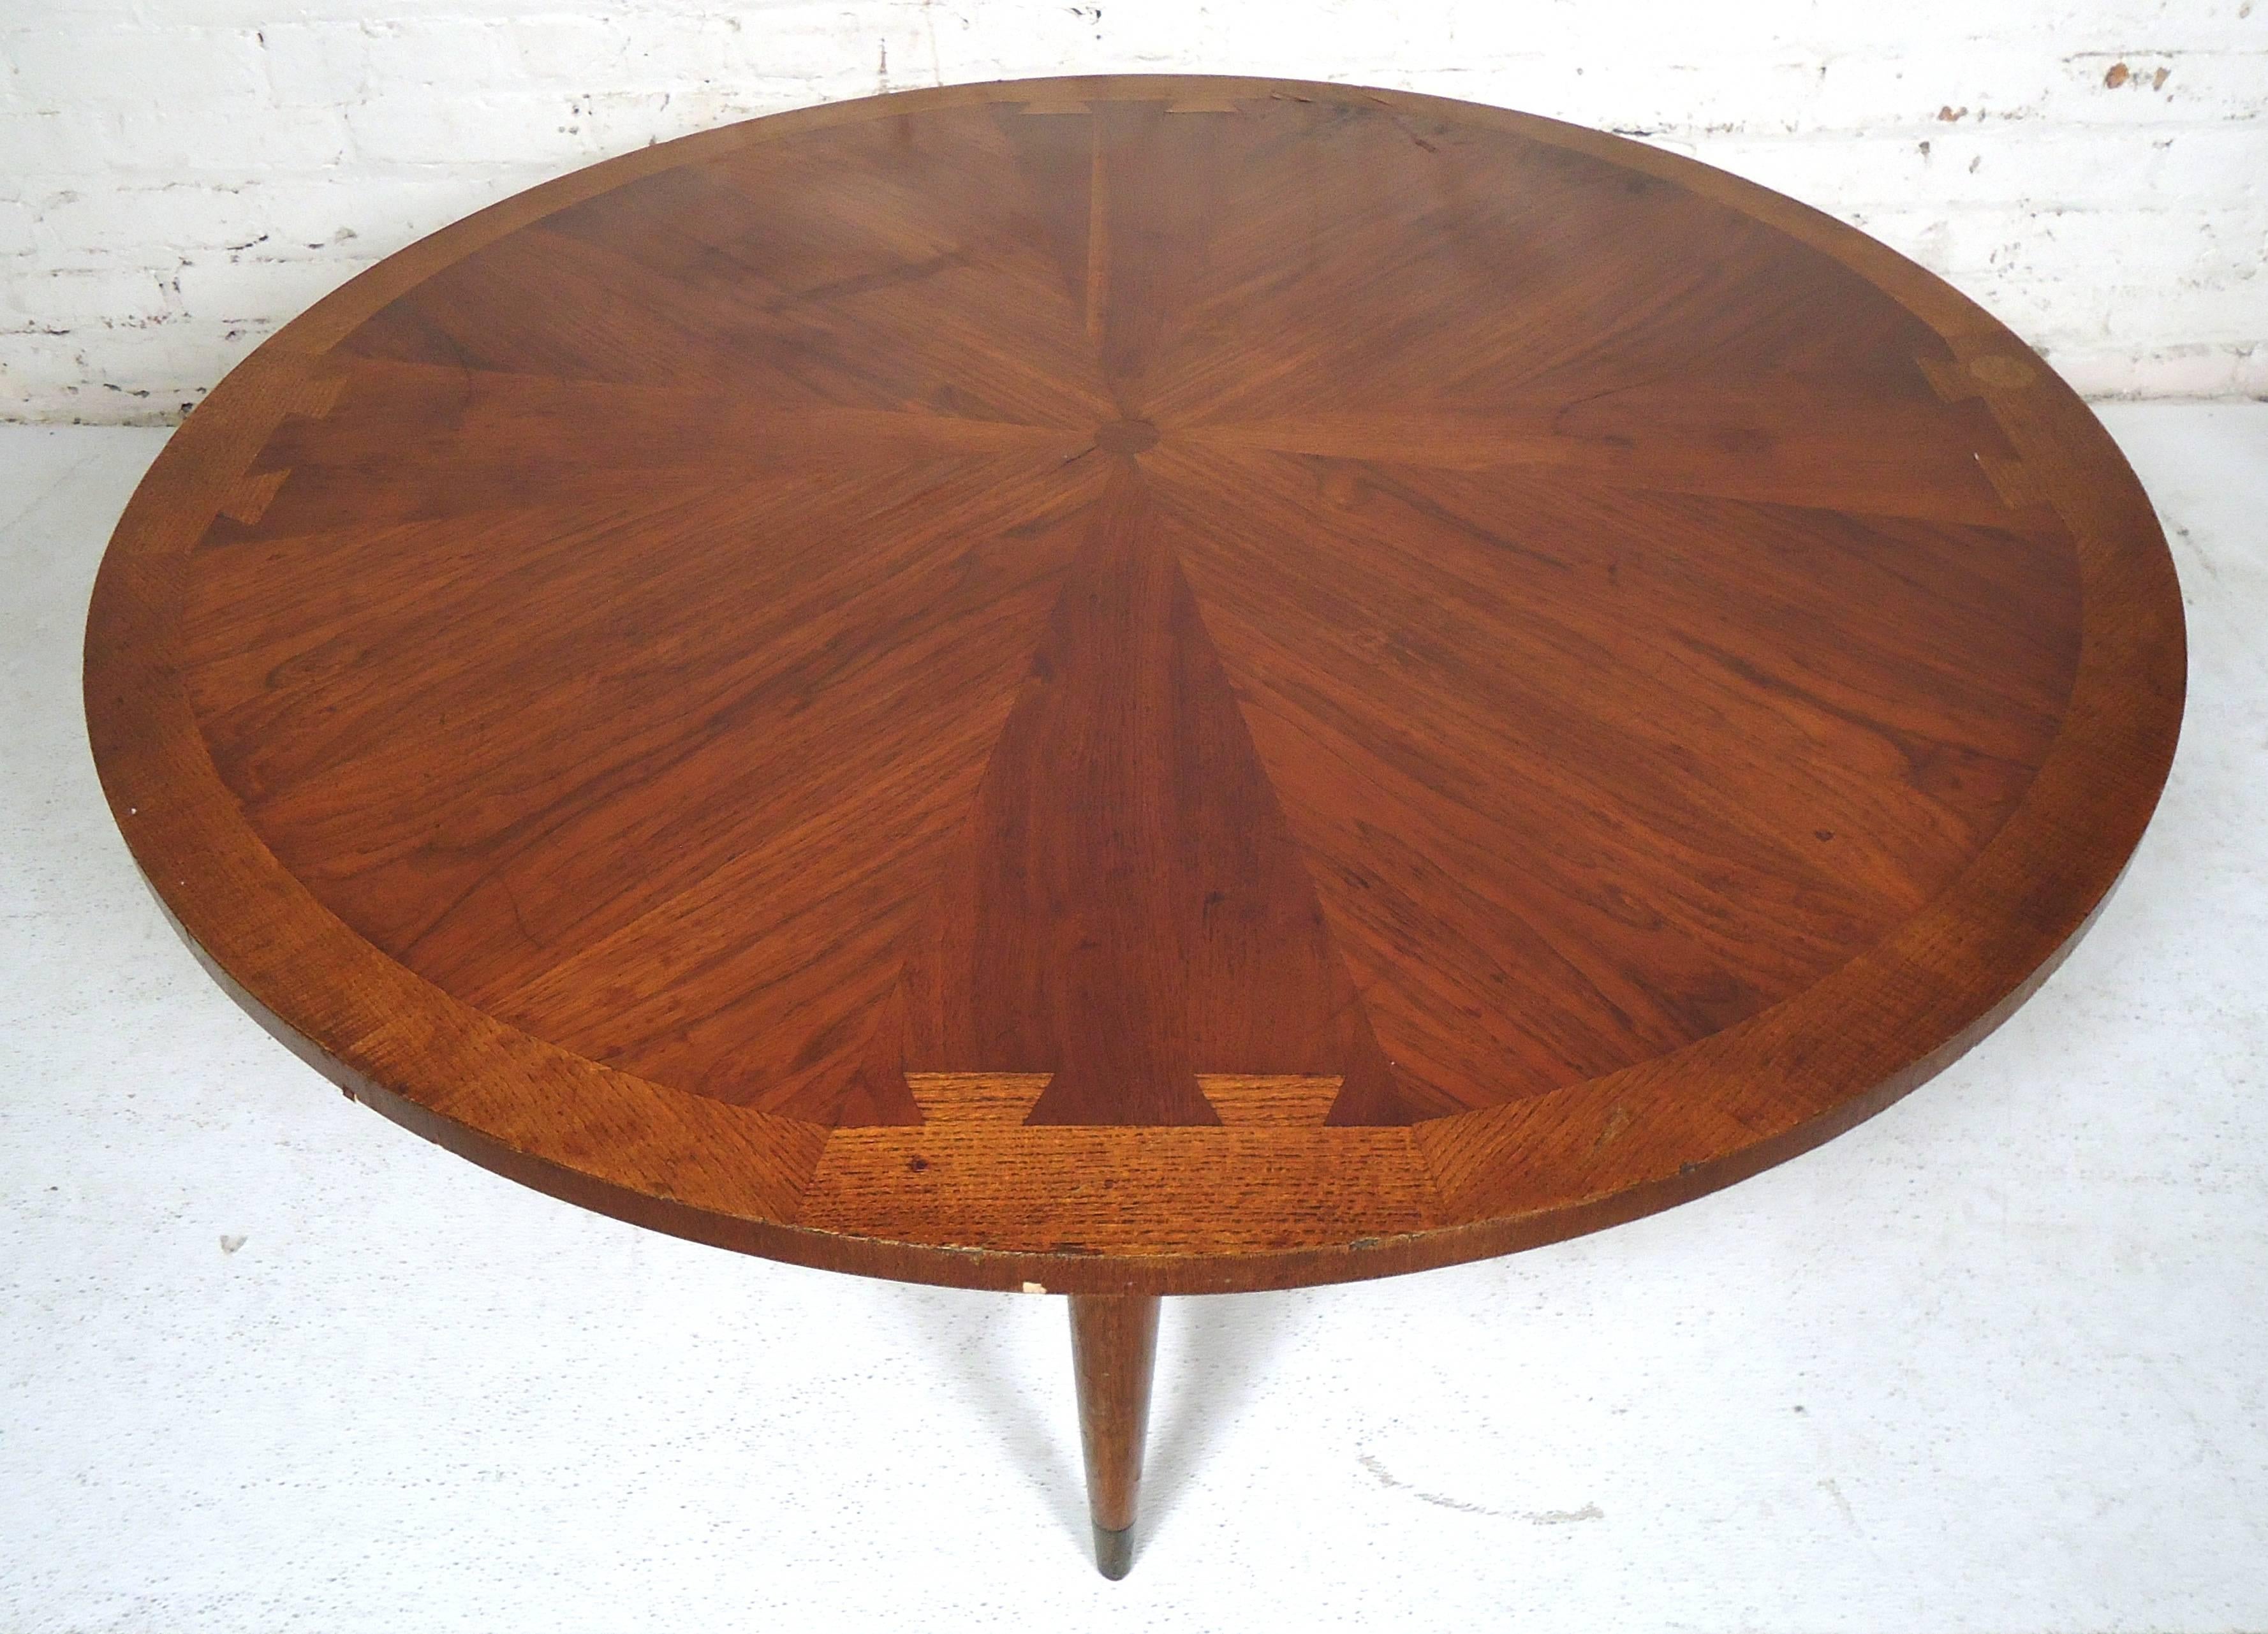 Gorgeous vintage modern round coffee table from lane featuring a uniquely designed dove tail inlay top.

(Please confirm item location NY or NJ with dealer).